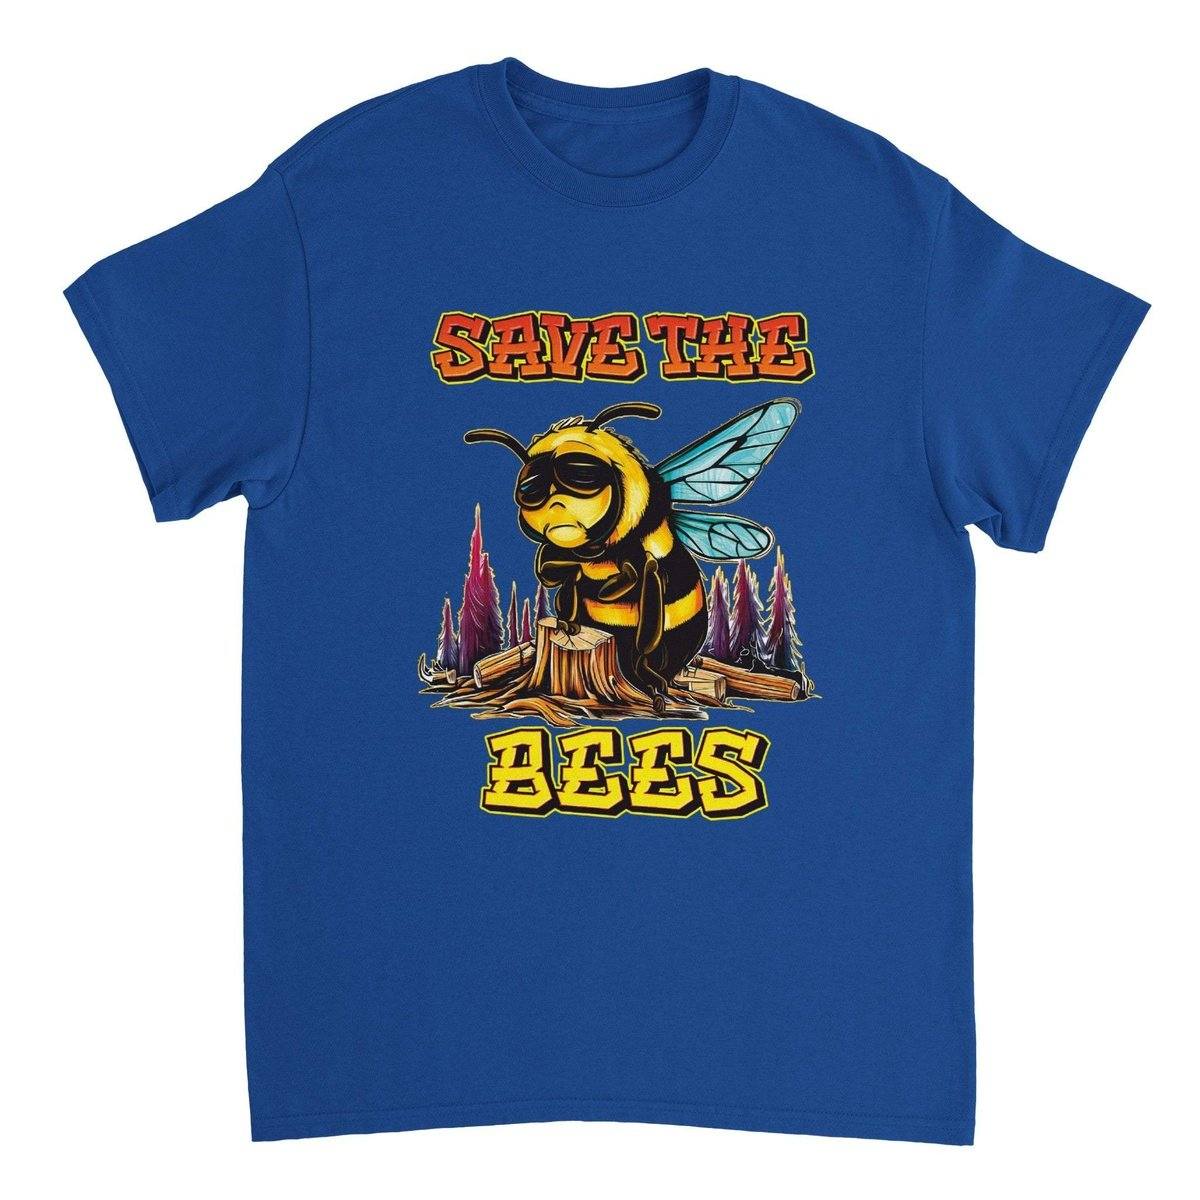 Save The Bees Tshirt - Crying Bee - Unisex Crewneck T-shirt Australia Online Color Royal / S